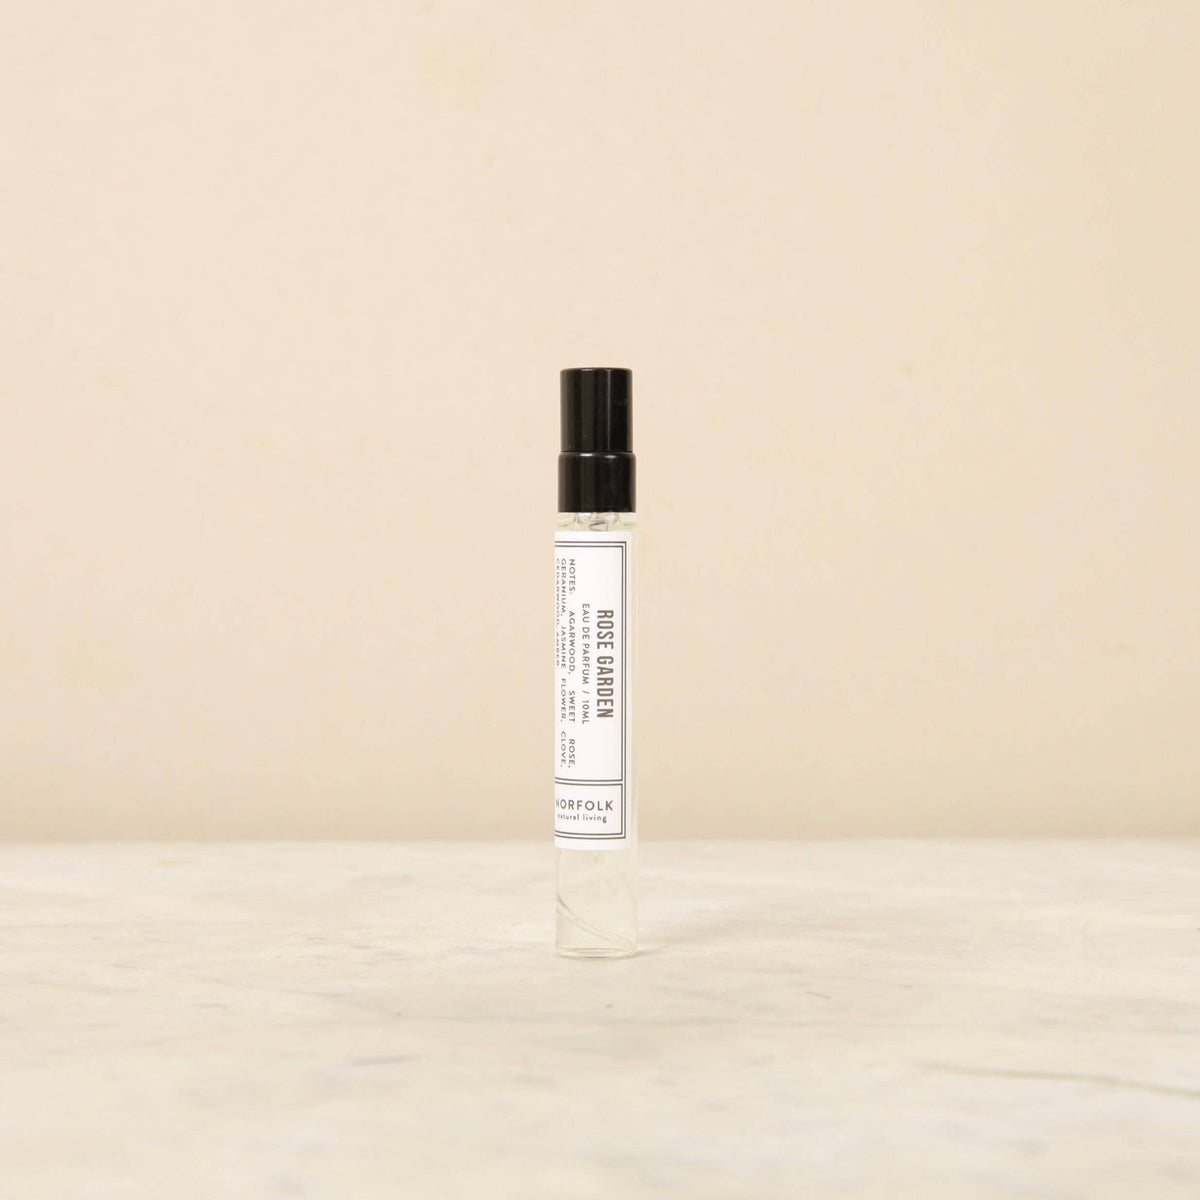 A small, cylindrical glass spray bottle with a black cap sits on a light-colored marble surface against a beige background. The bottle has a white label with black text that reads "Norfolk Natural Living Parfum - Rose Garden 10ml" and "Norfolk Natural Living," promising a long-lasting fragrance.